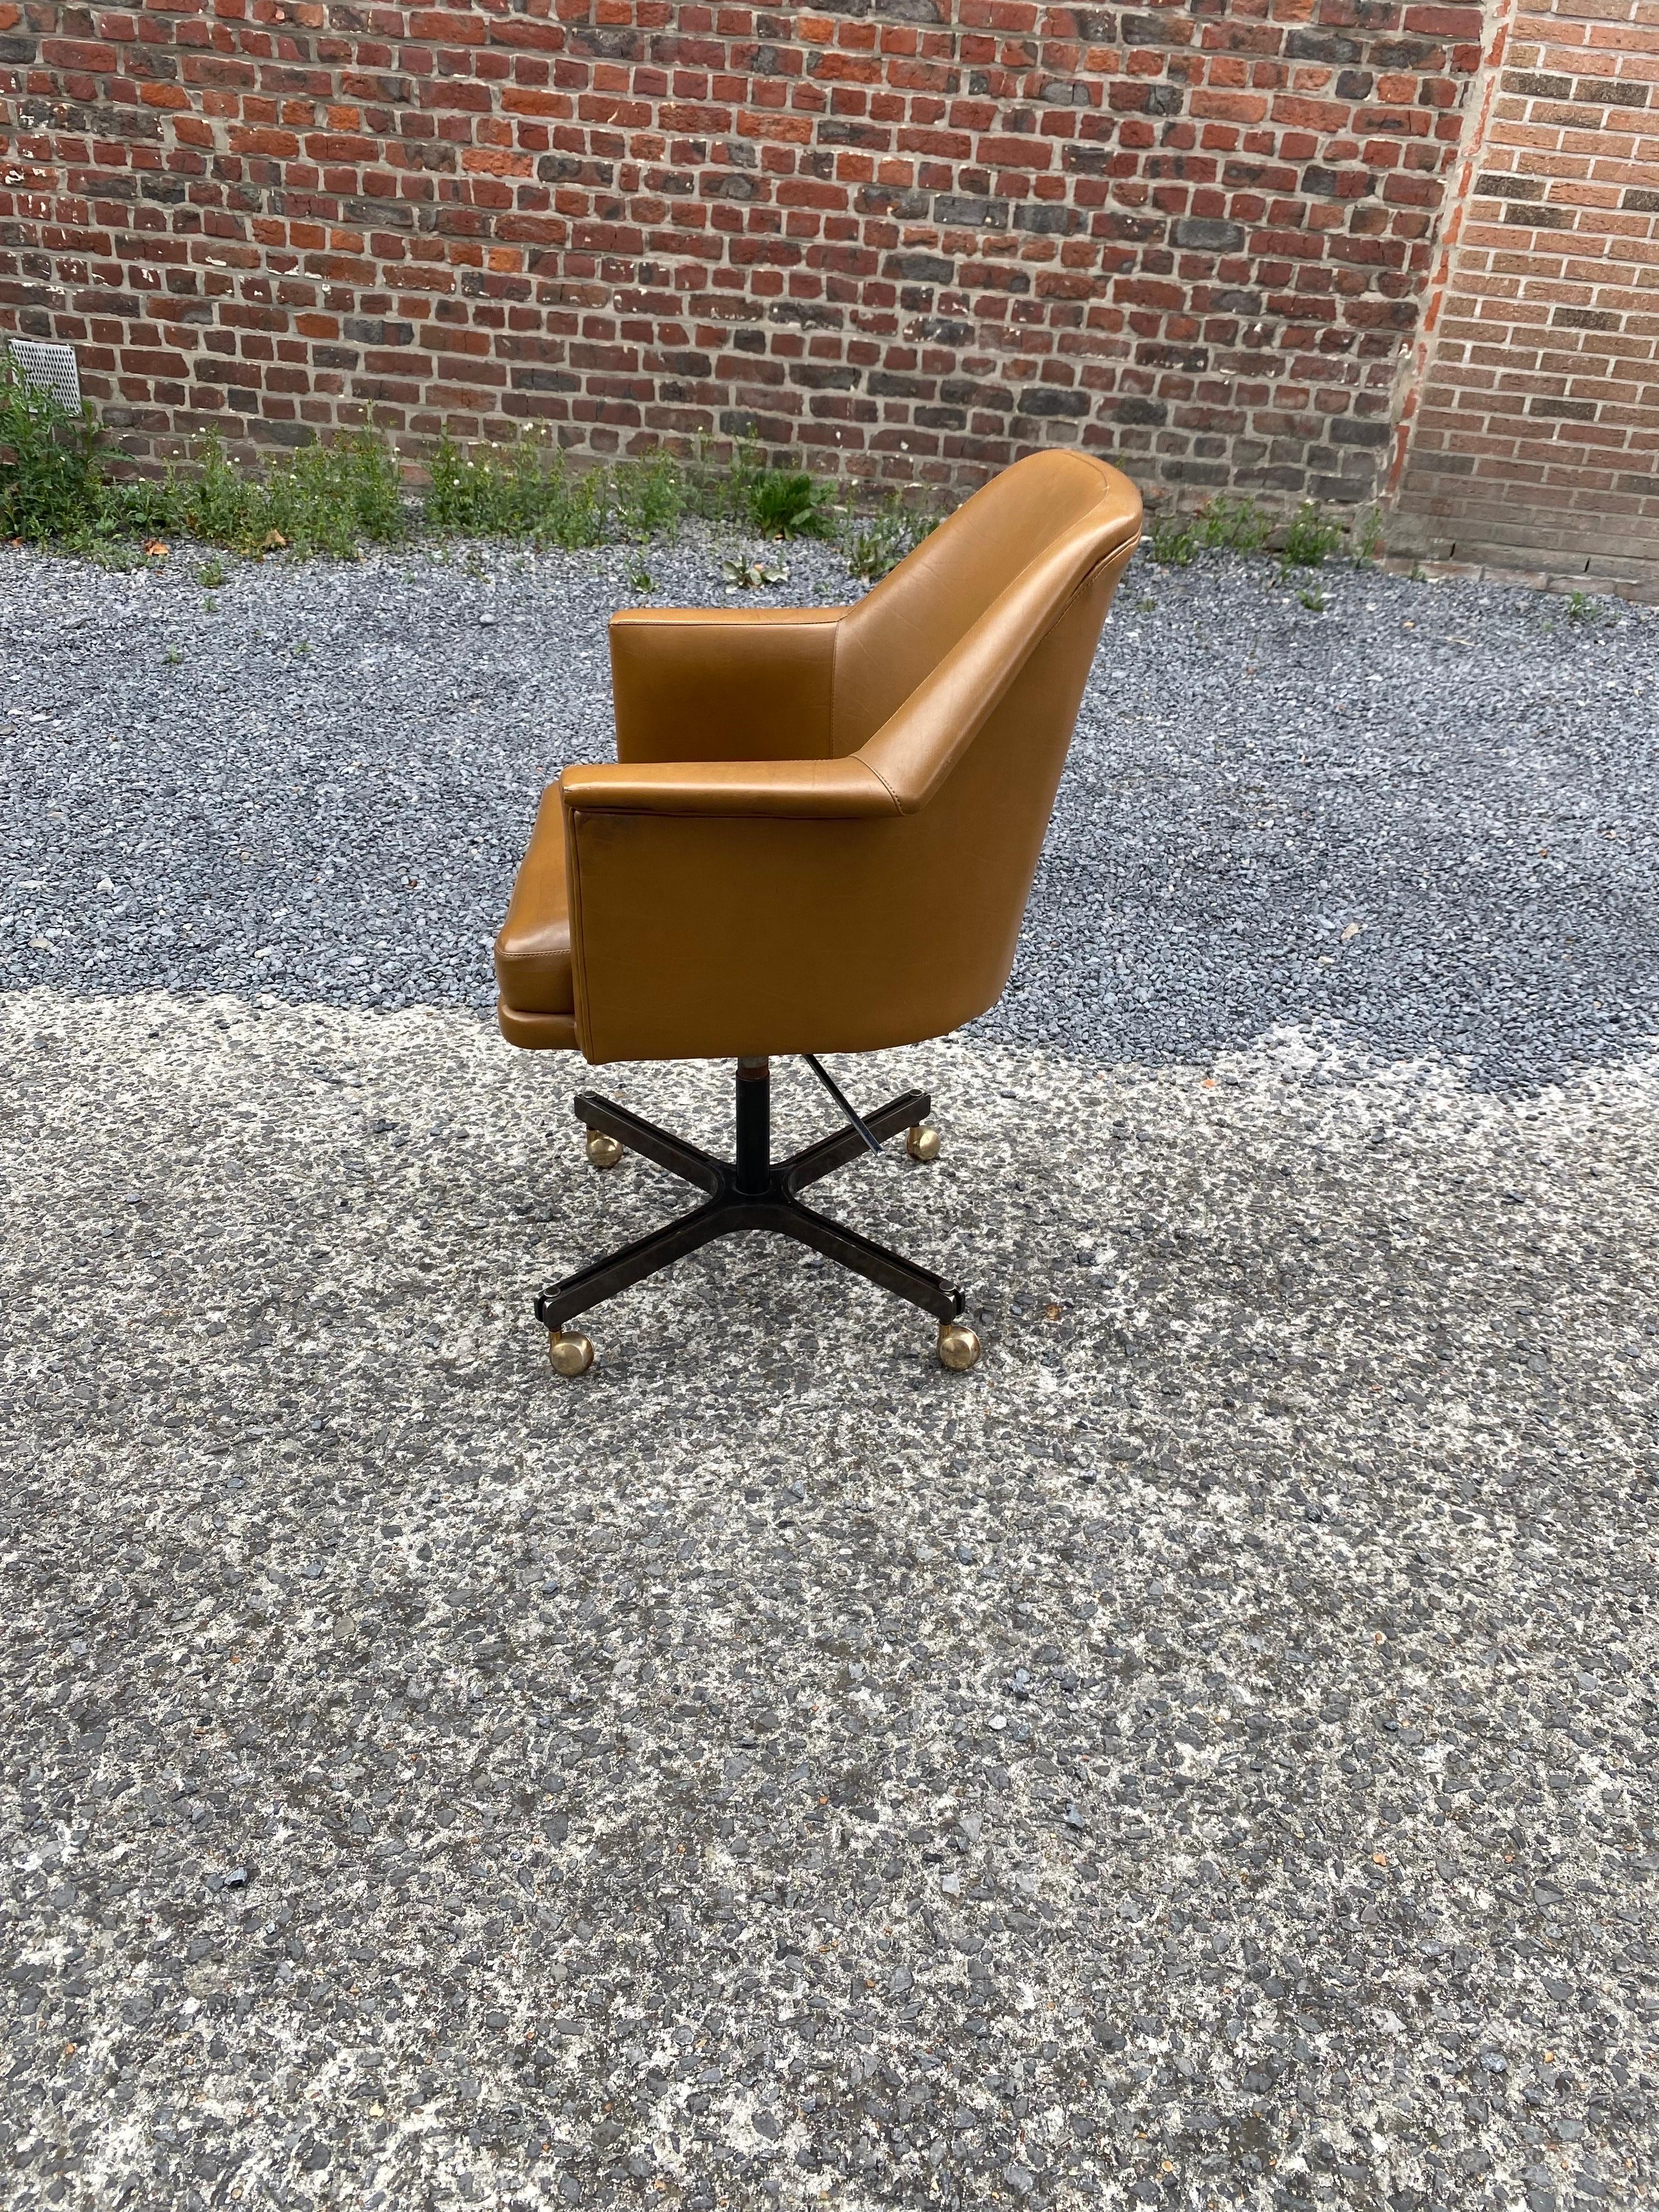 Office armchair in imitation leather and metal;
the upholstery needs to be changed
this armchair rotates and swivels, circa 1960.